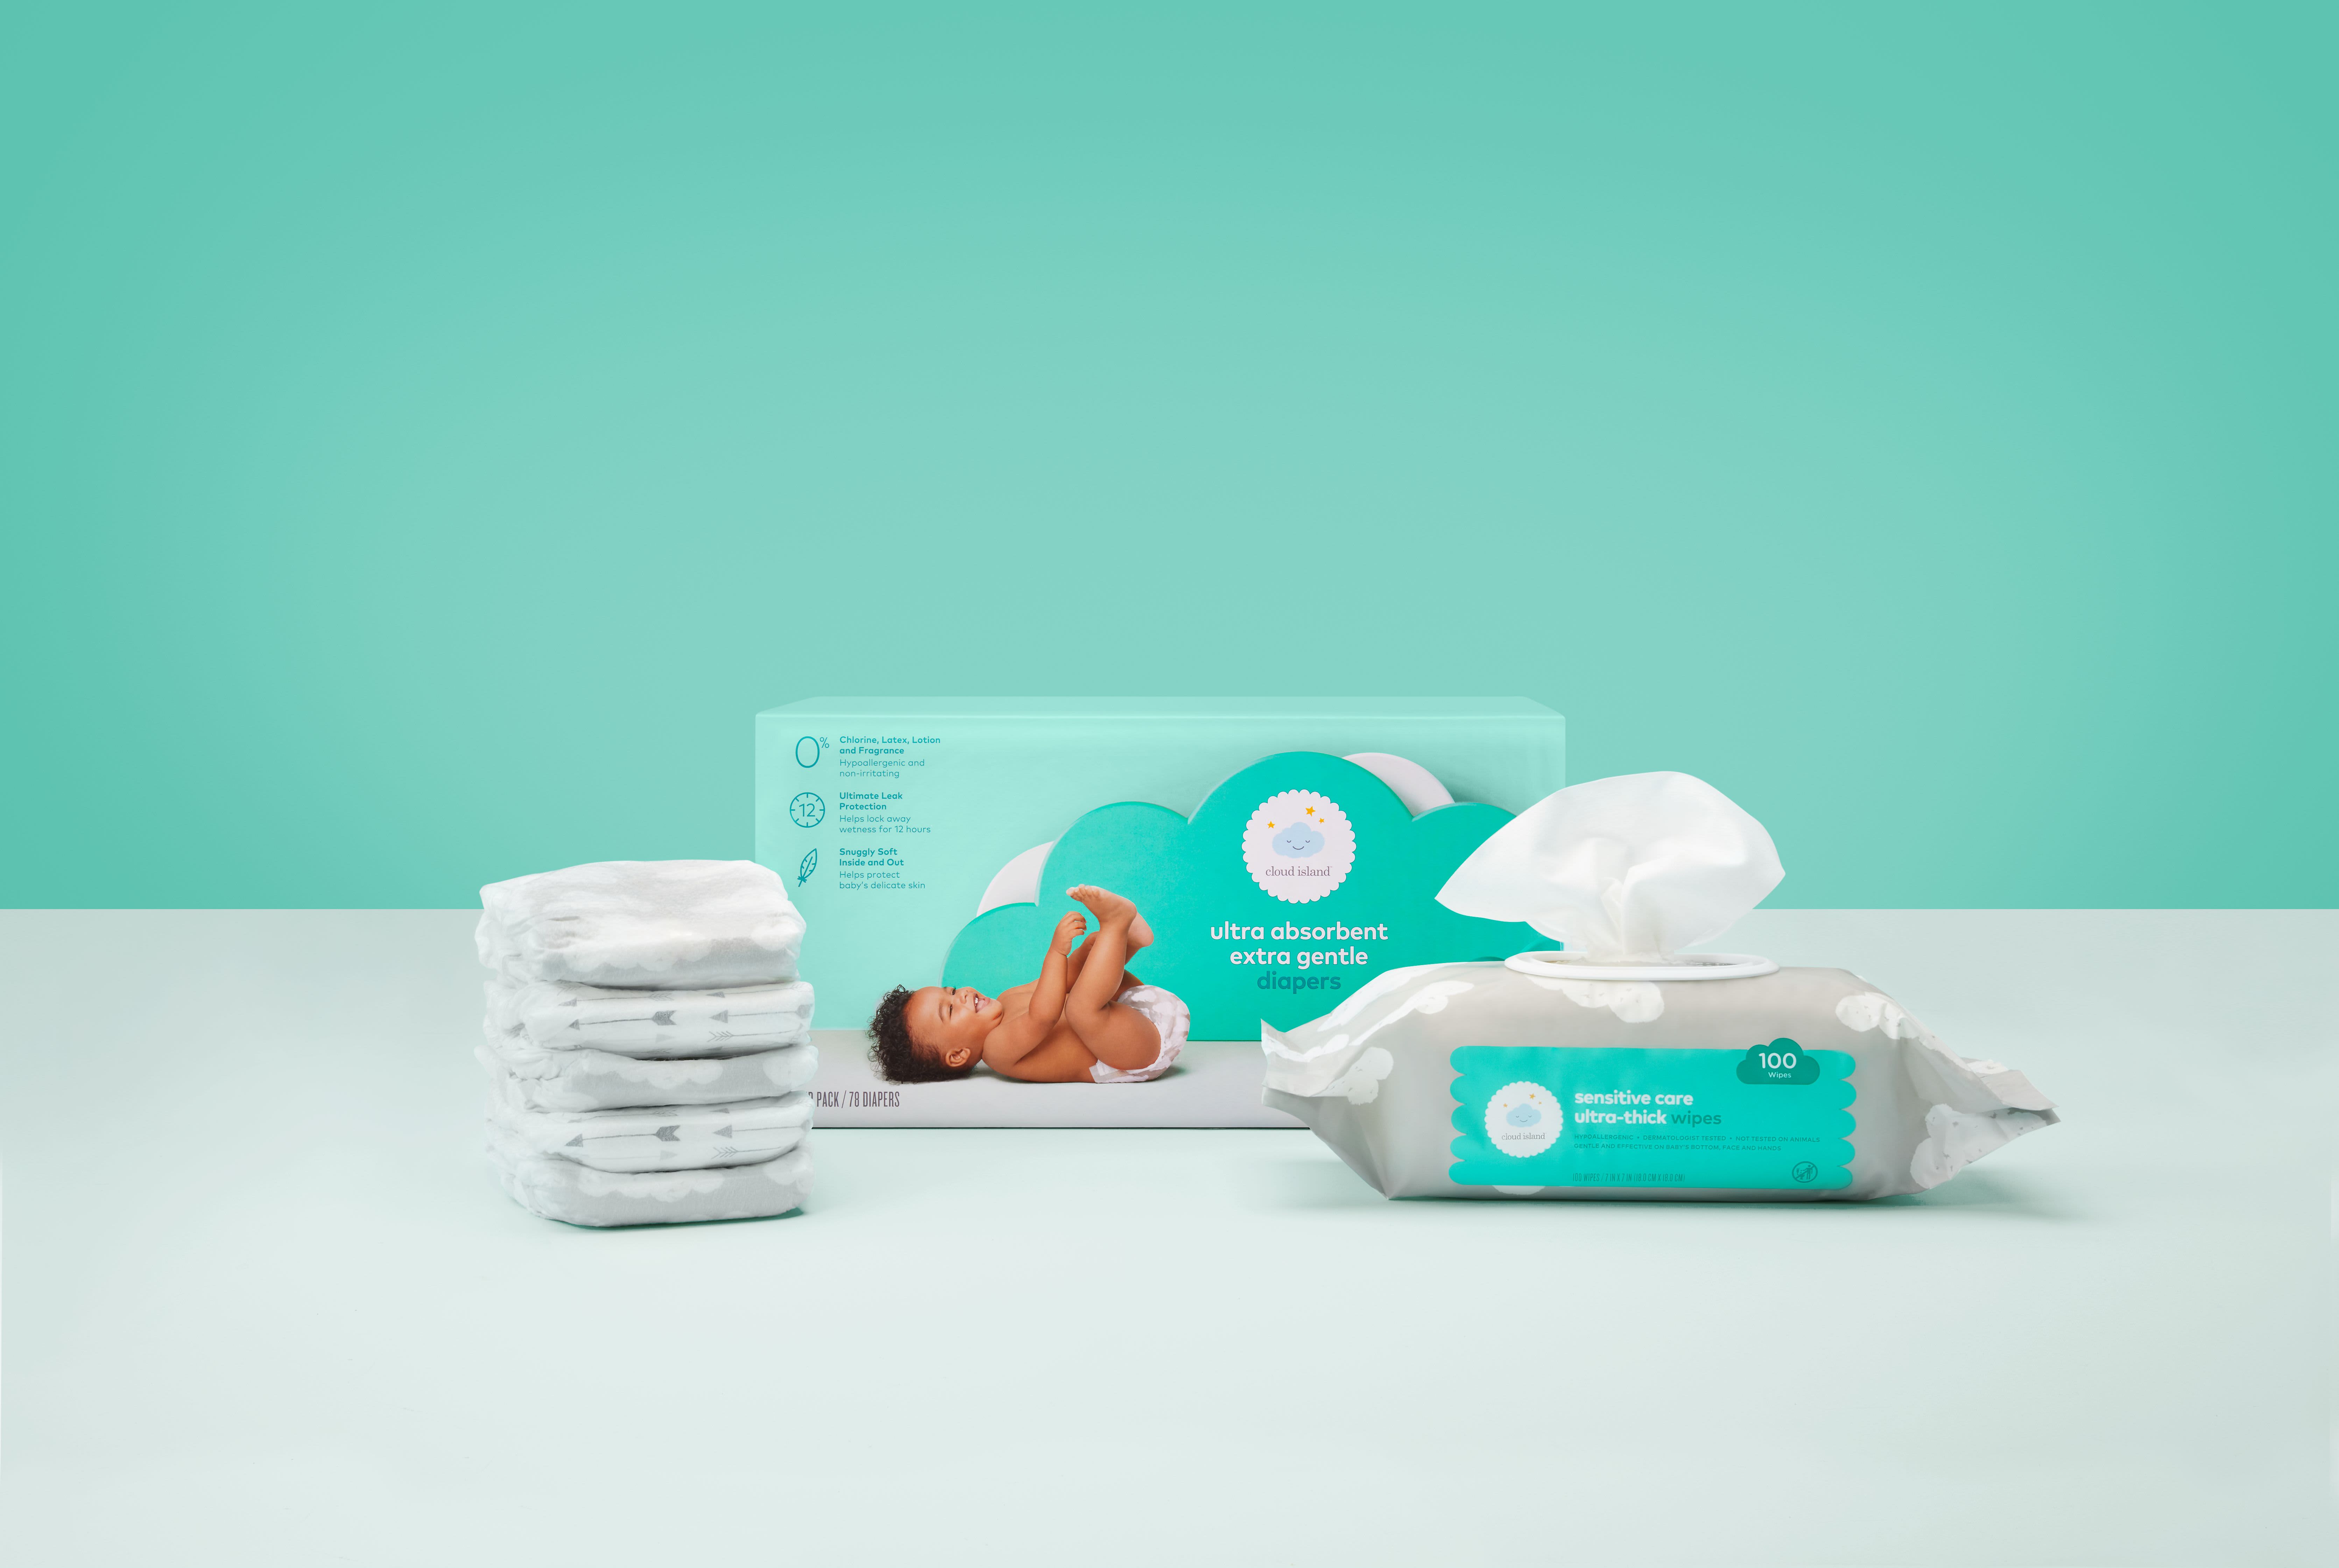 target baby diapers